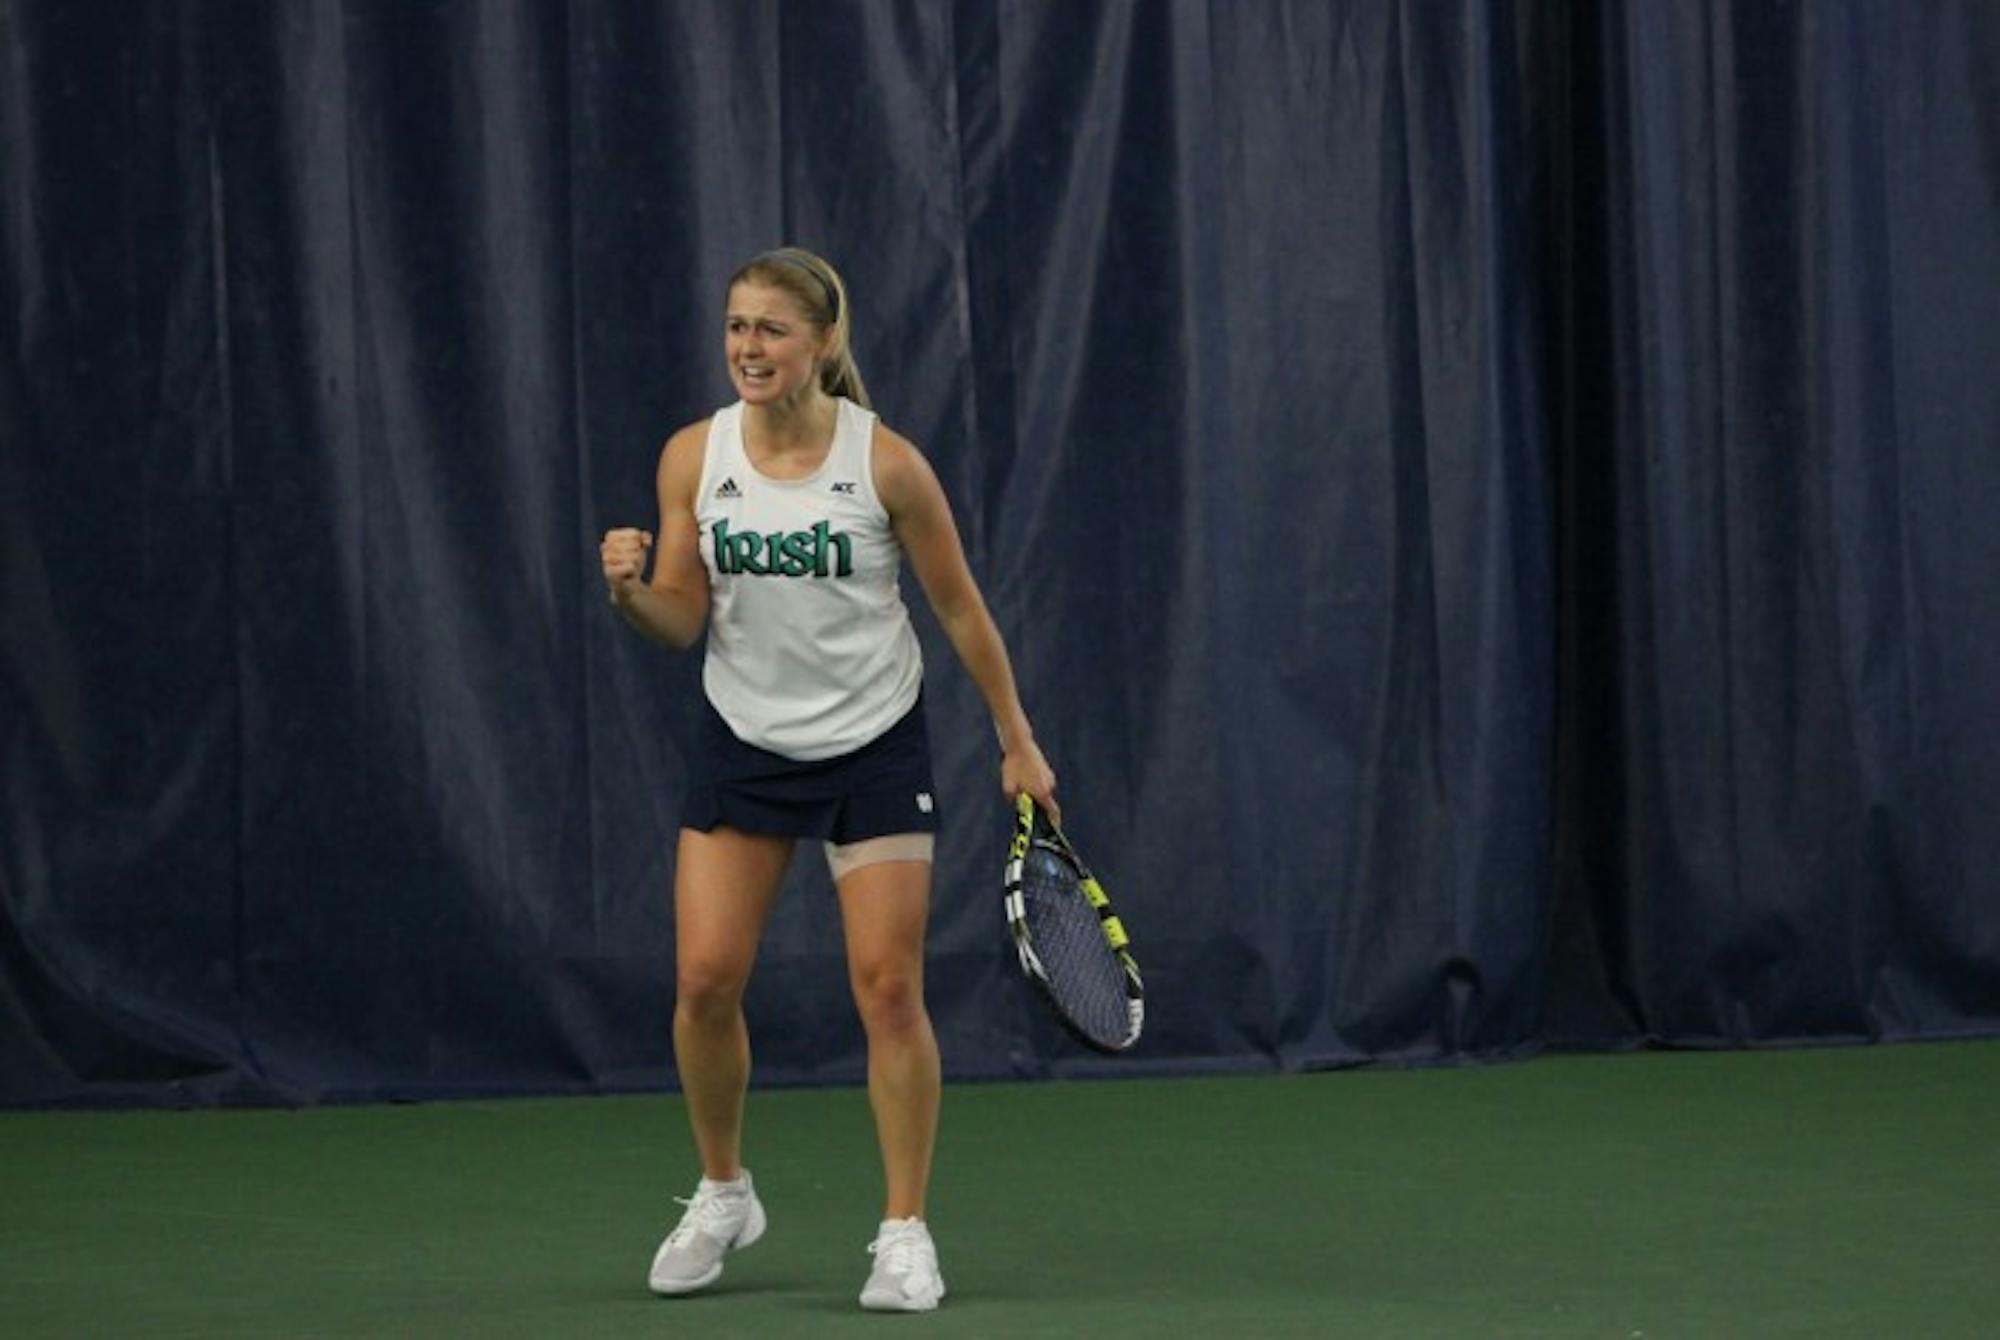 Irish sophomore Monica Robinson celebrates after winning a point in Notre Dame’s match against  Indiana on Feb. 2 at Courtney Tennis Center. Notre Dame defeated Indiana 4-3.